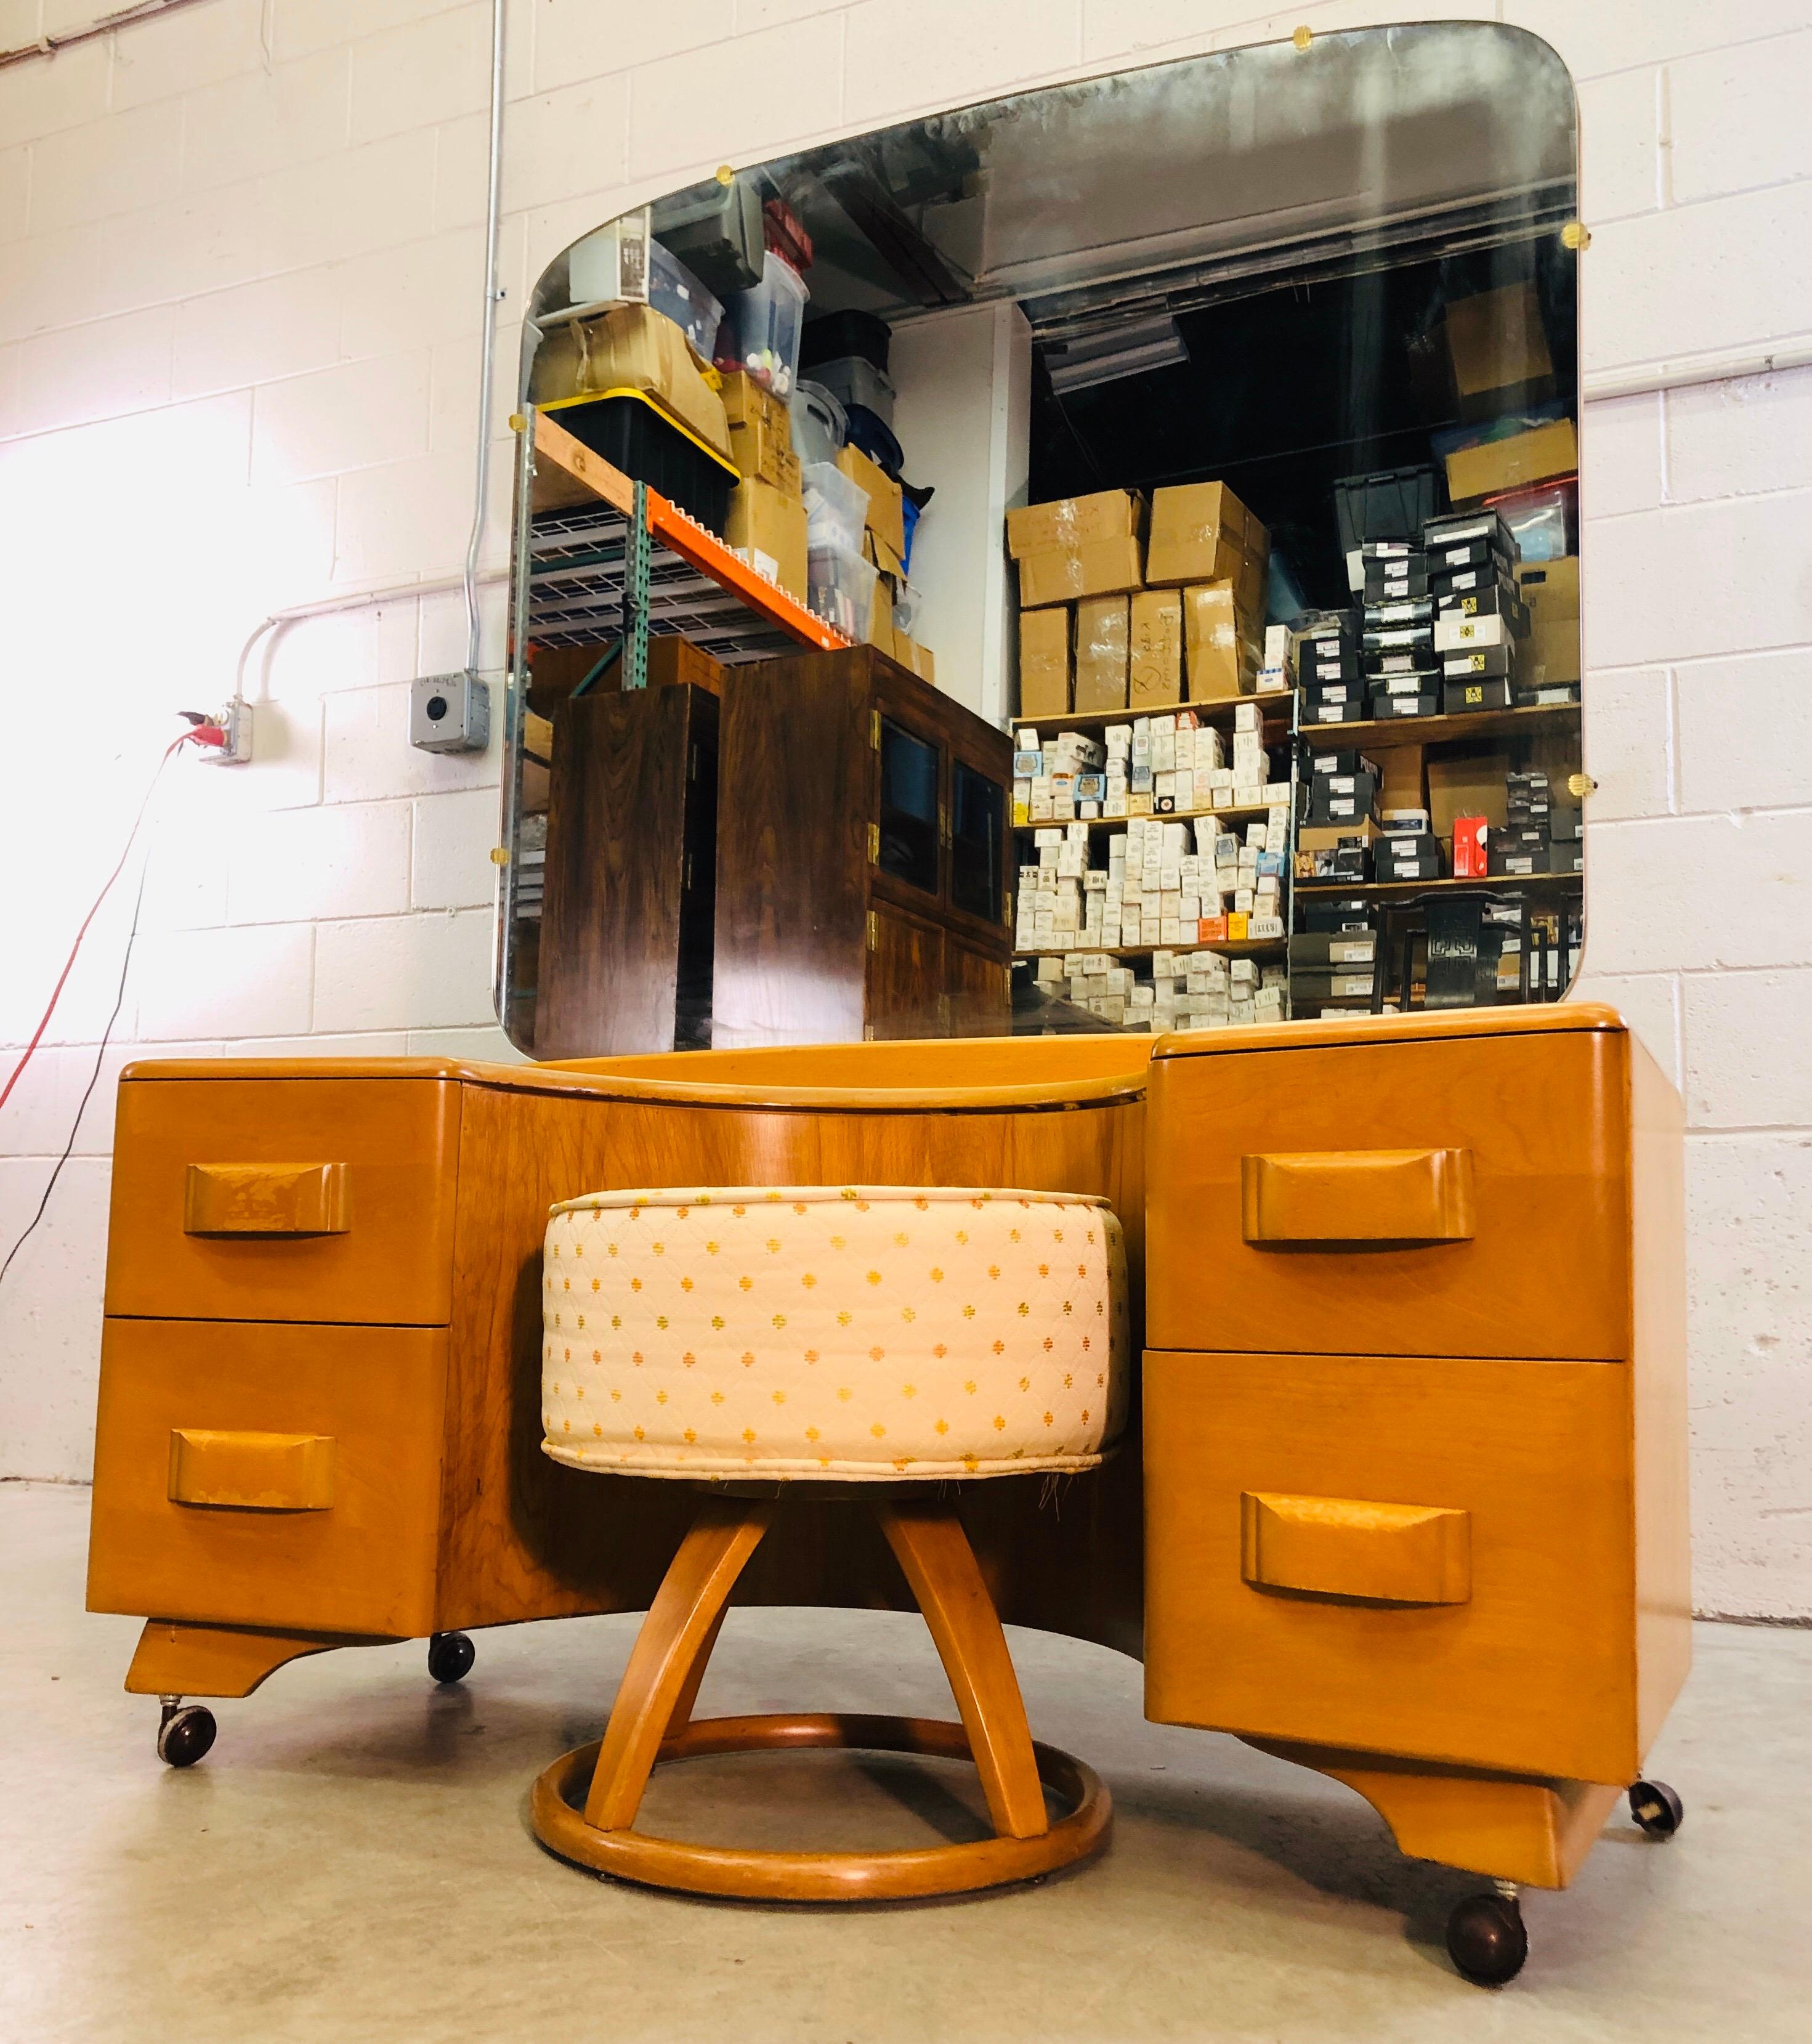 Vintage 1950s Heywood Wakefield maple wood vanity with mirror and foot stool set in the champagne finish. The vanity has 4 drawers for storage and comes with matching foot stool. Mirror is in excellent condition. Stool measures 18” diameter x 19”